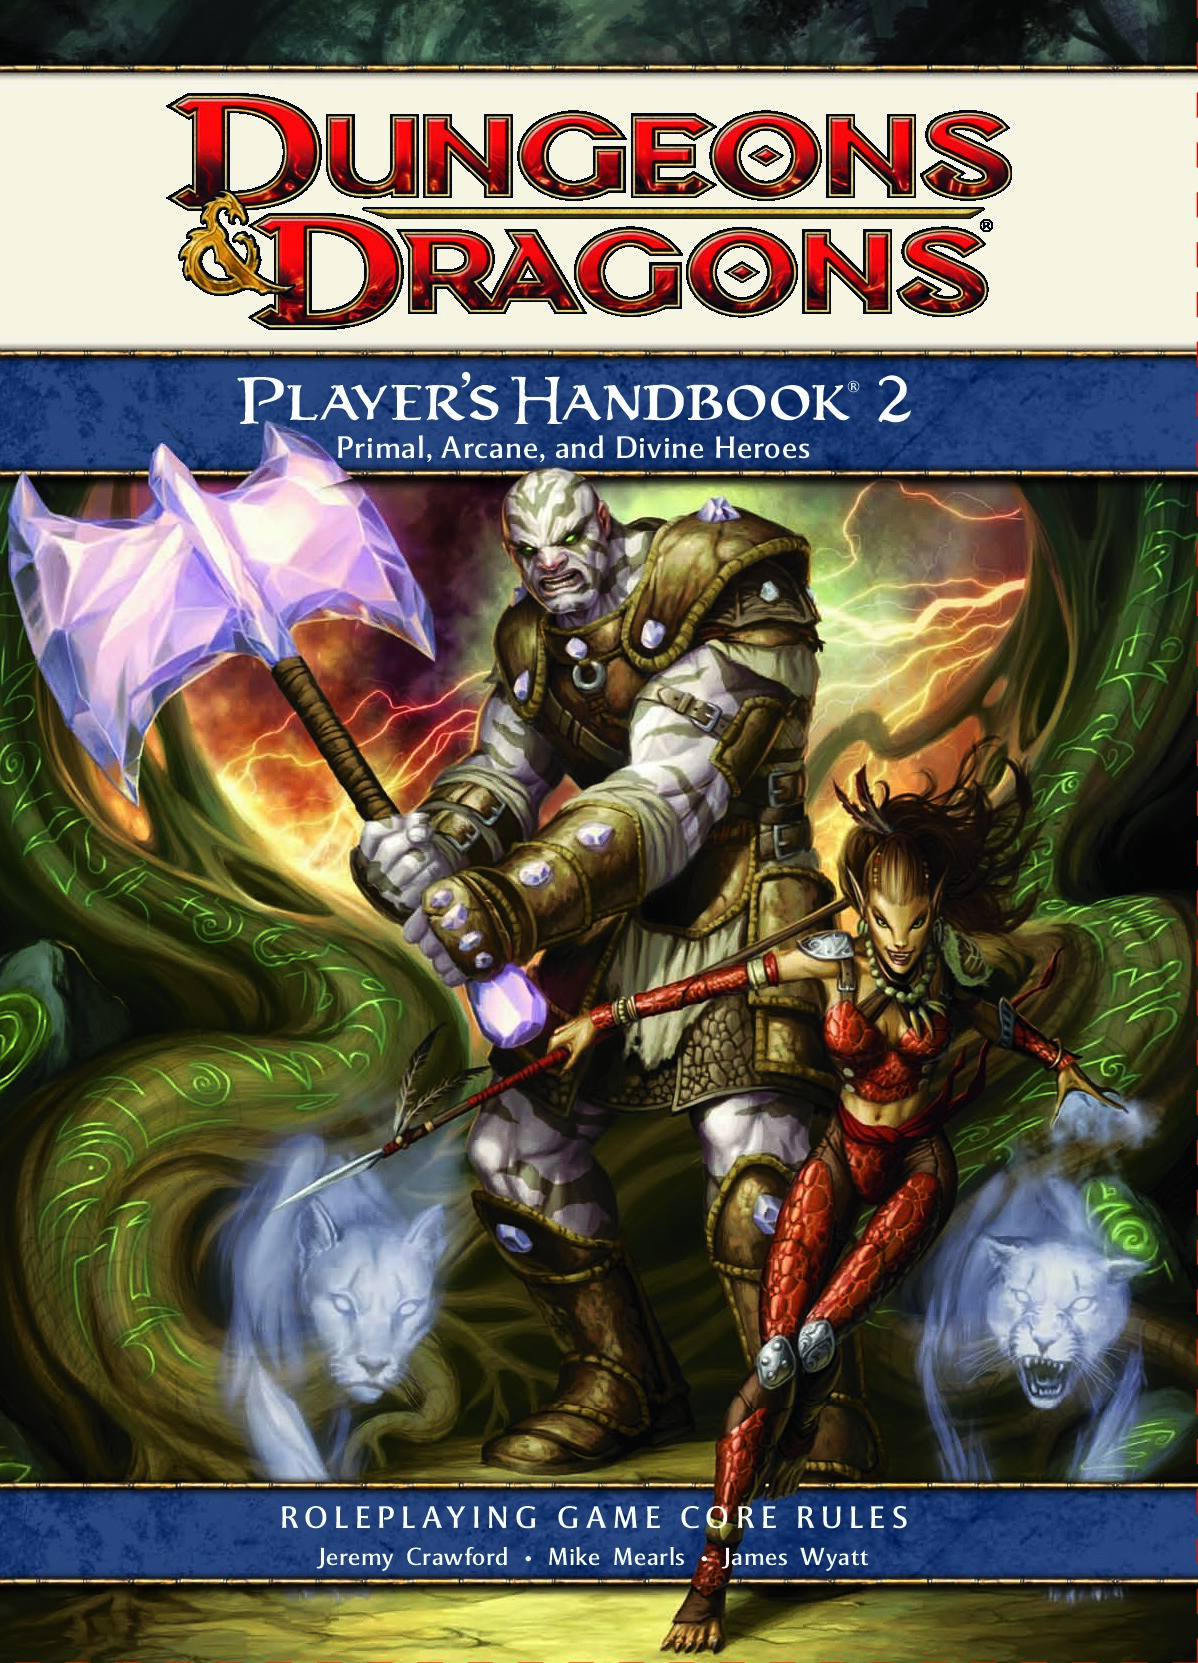 Dungeons and Dragons 4th EditionPlayer's Handbook 2